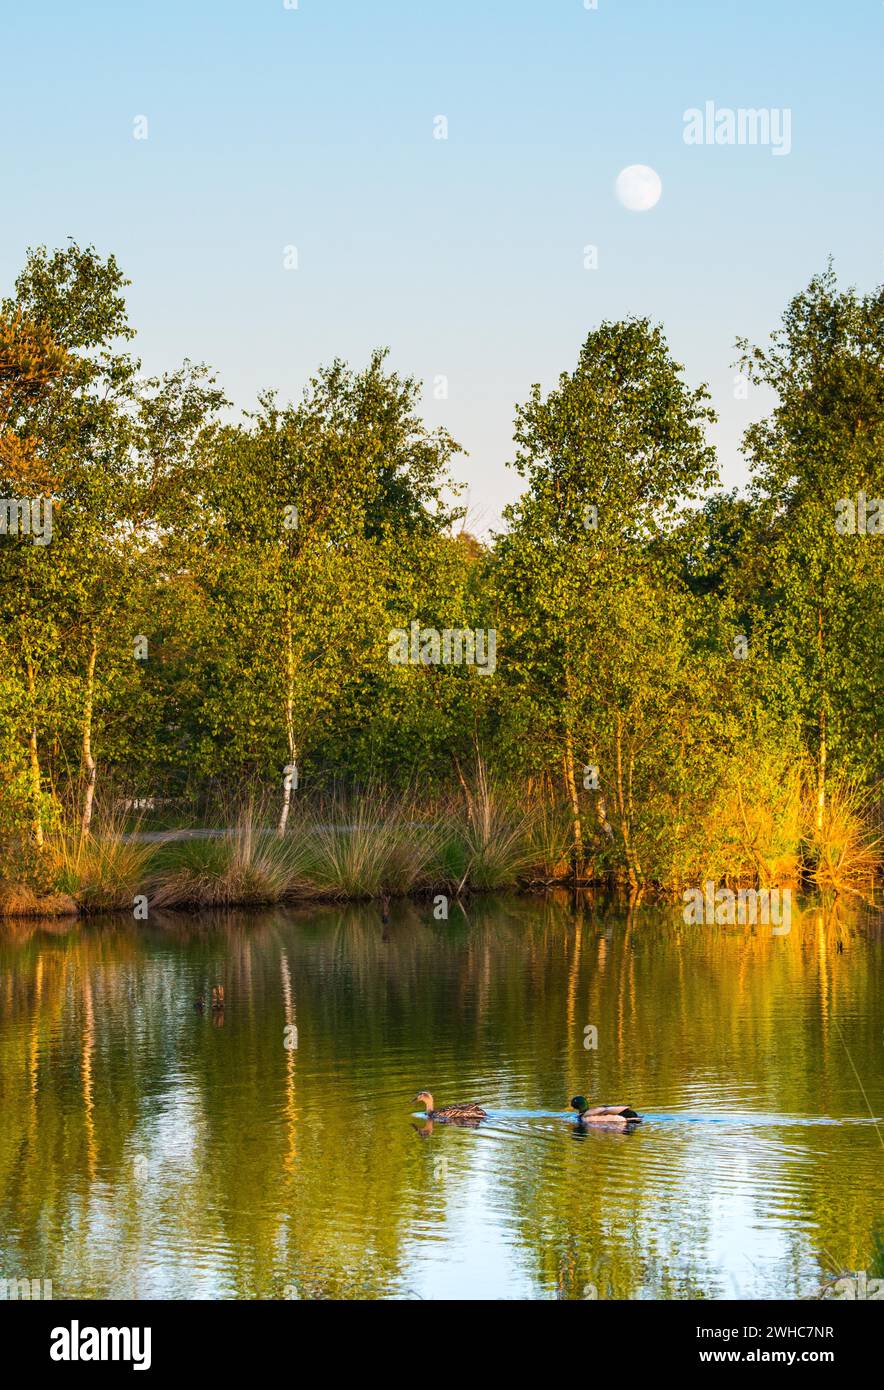 A pair of mallards (Anas platyrhynchos), male and female swimming on a calm pond under a clear blue sky with the full moon shining, warm evening Stock Photo